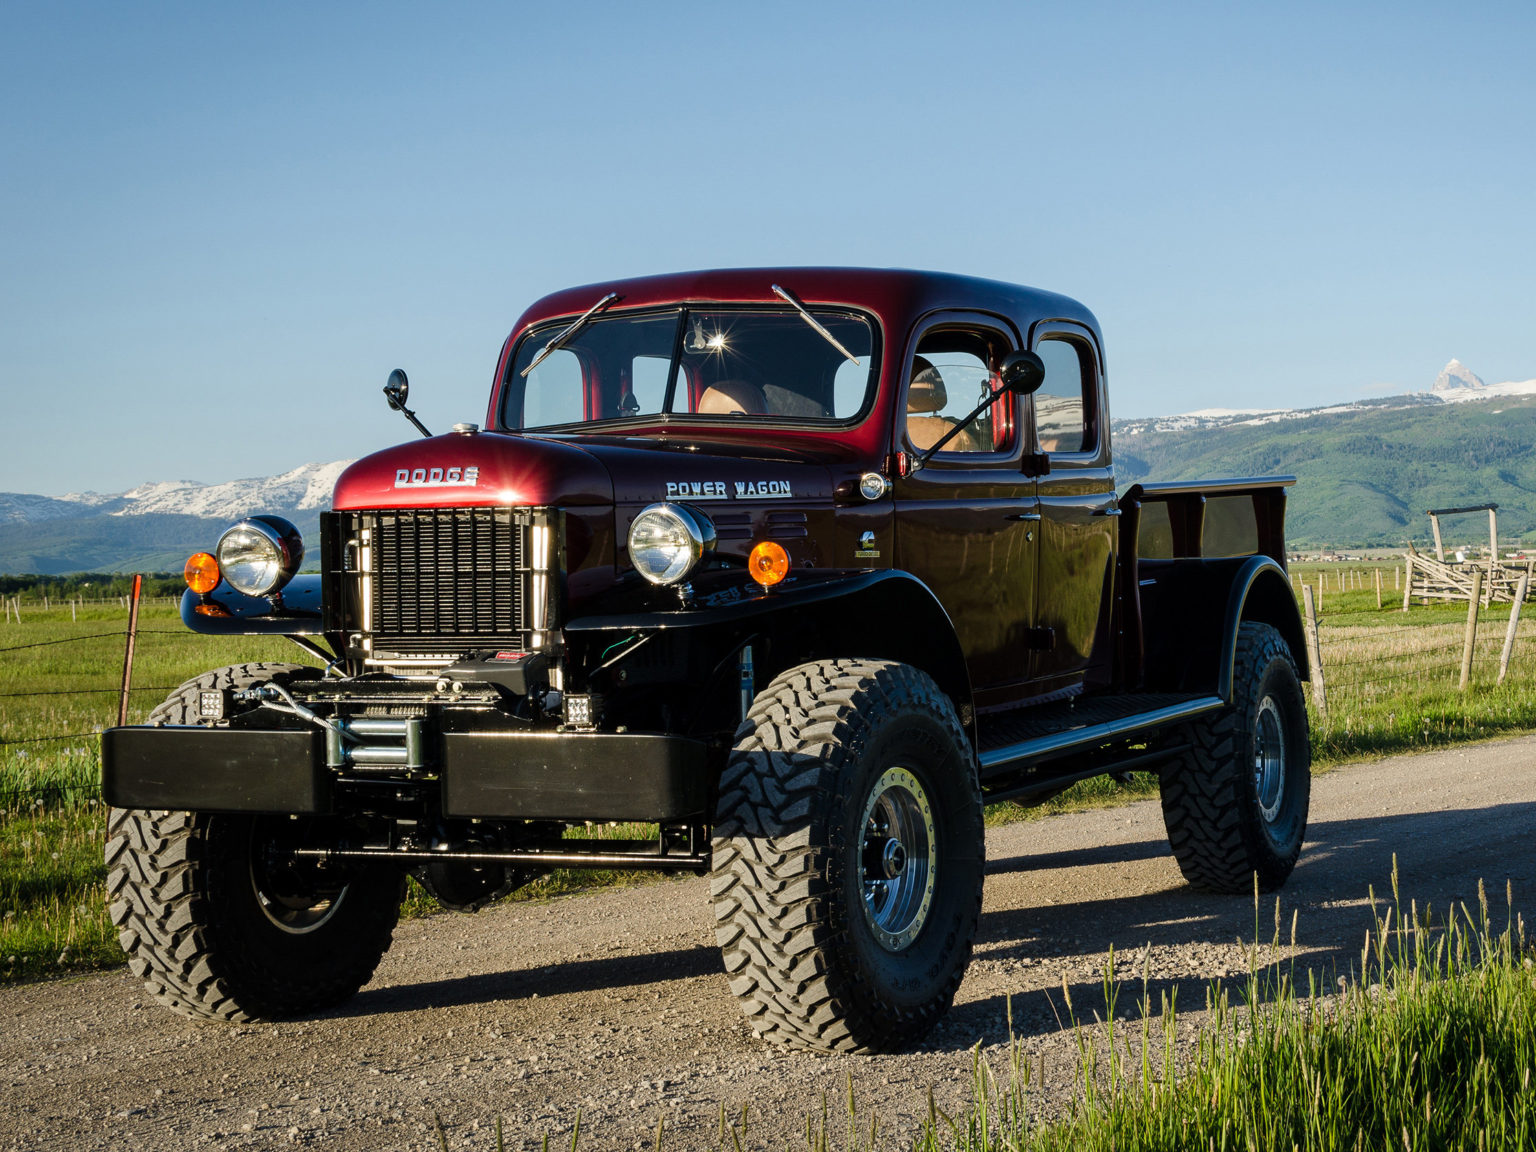 This Dodge Power Wagon has gone from antique to a rough and ready off-roader.